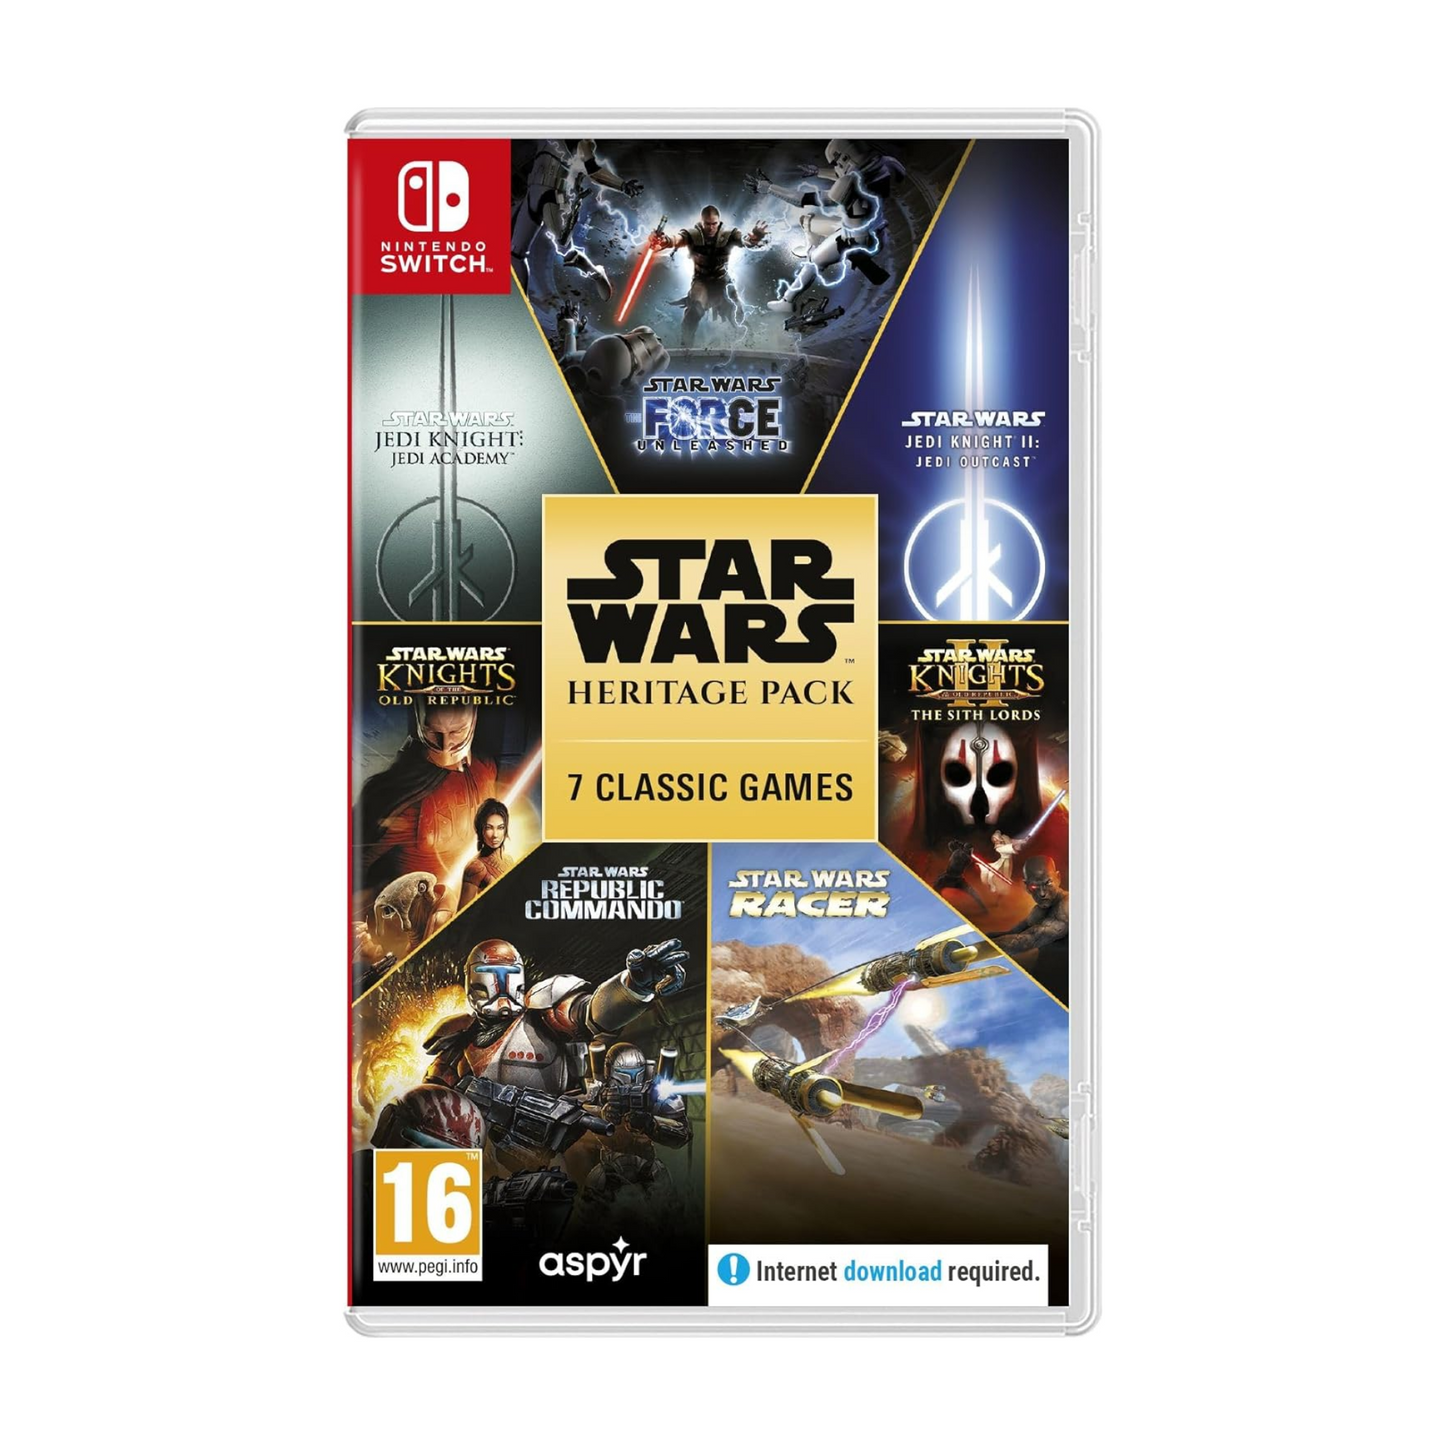 Star Wars Heritage Pack Video Game for Nintendo switch